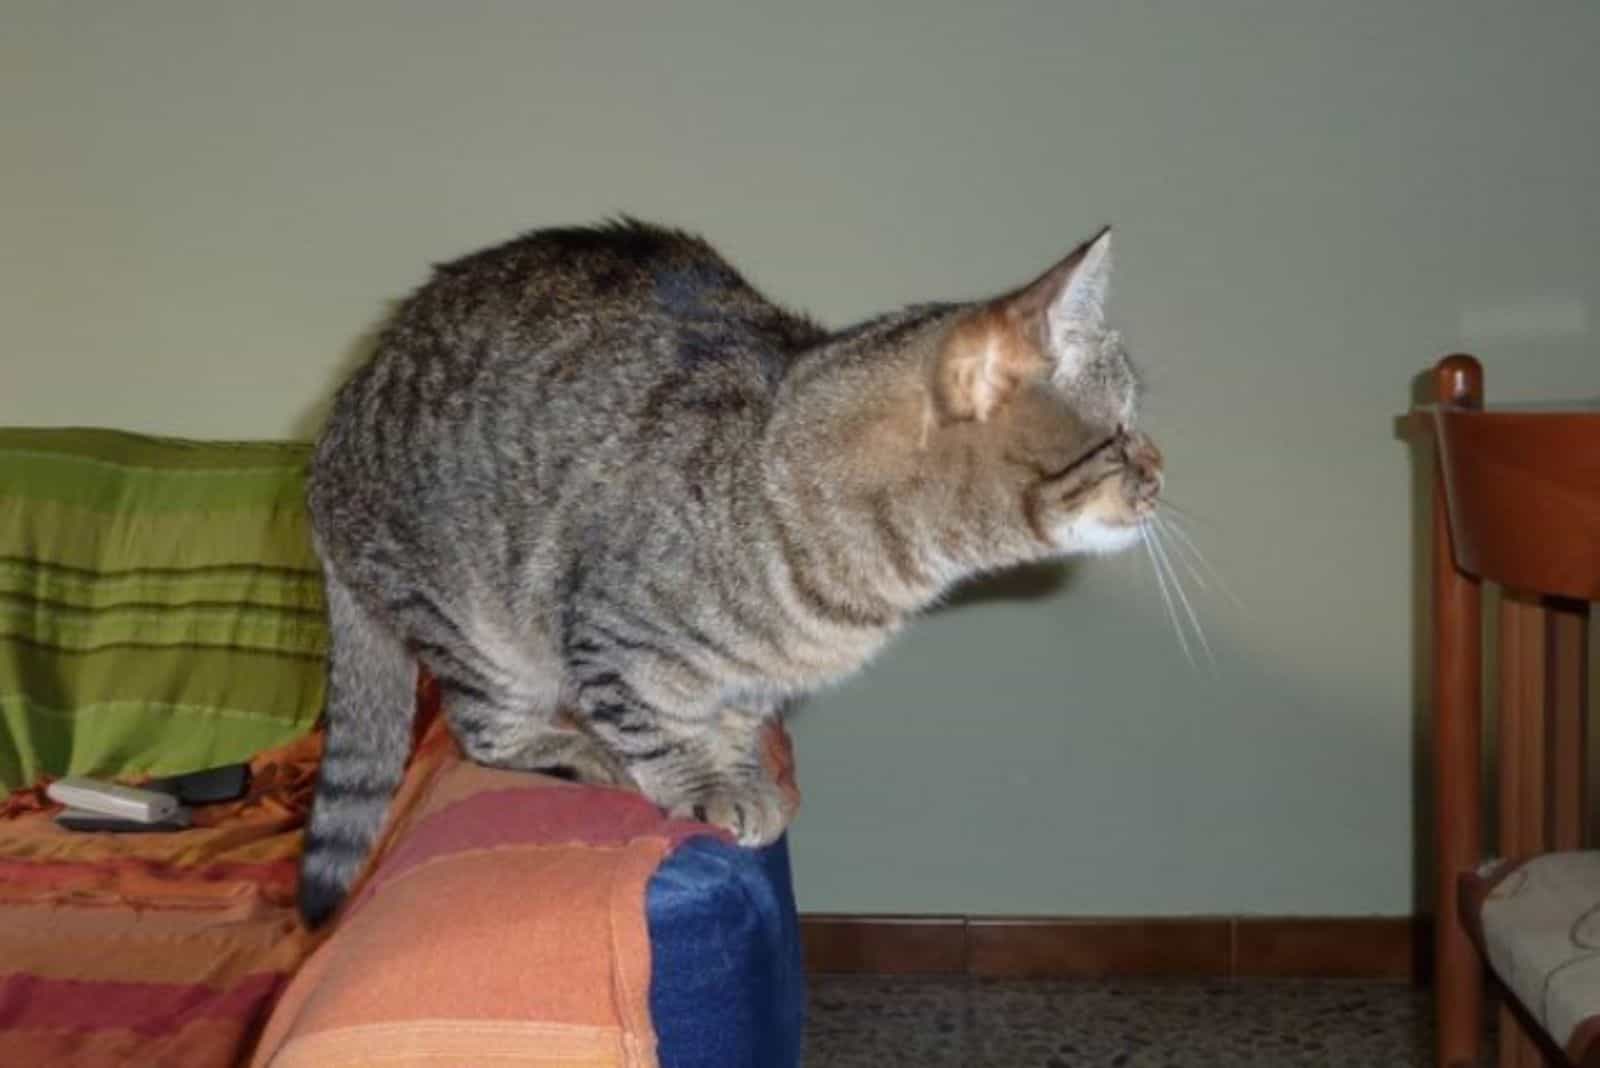 the rescued cat is standing on the armchair